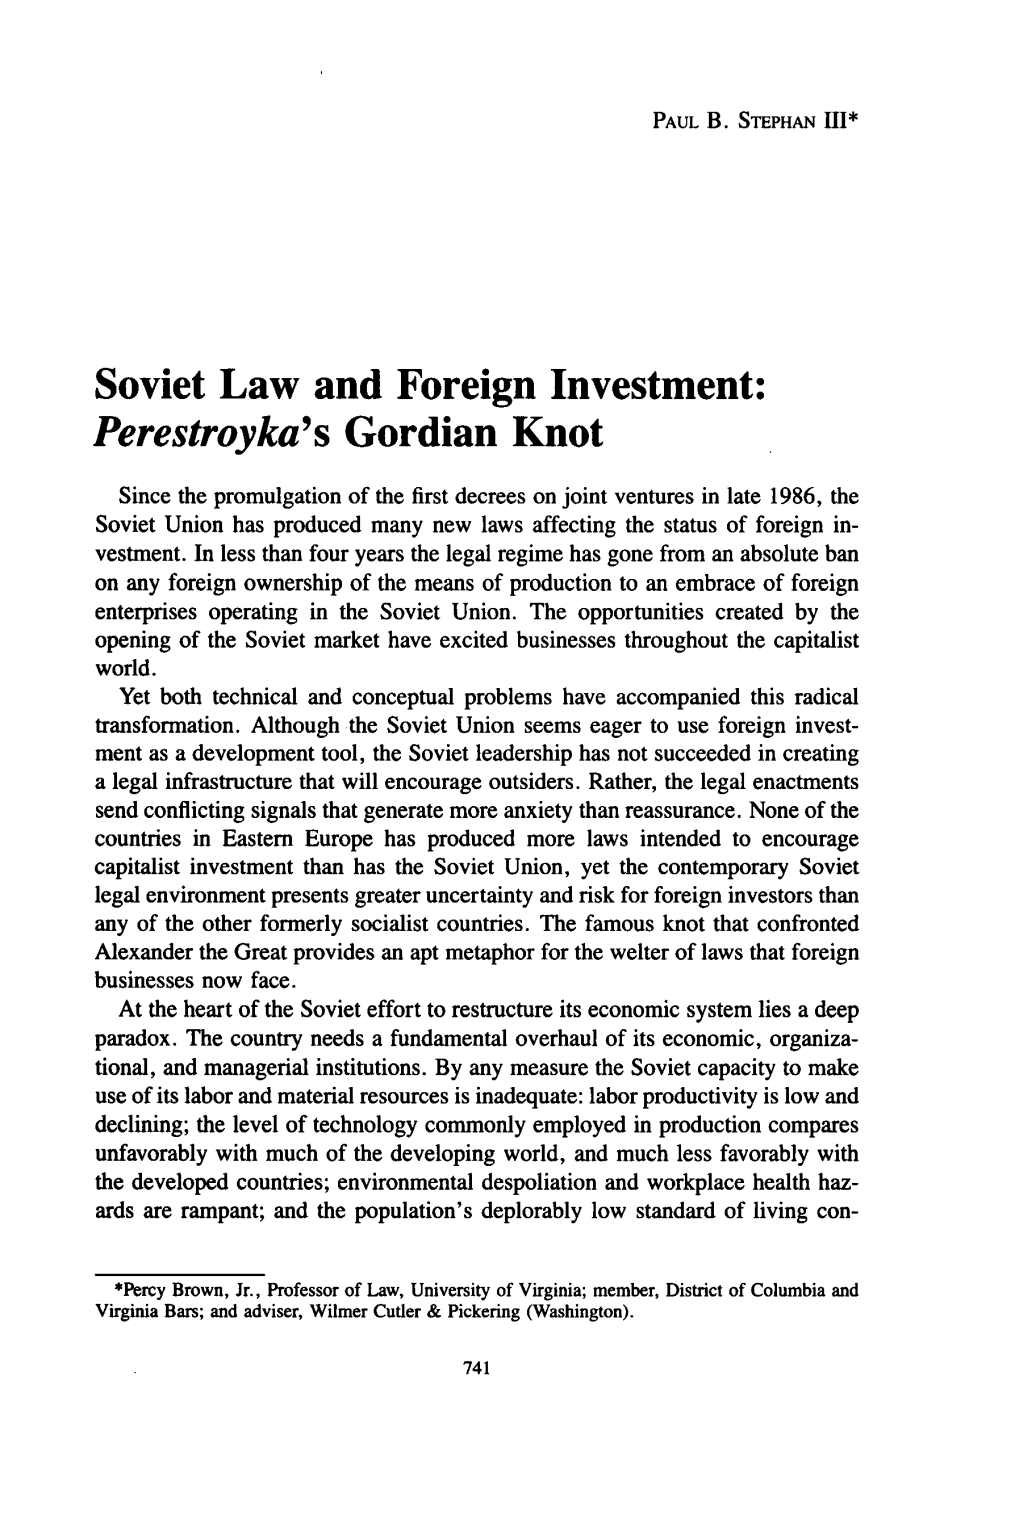 Soviet Law and Foreign Investment: Perestroyka's Gordian Knot